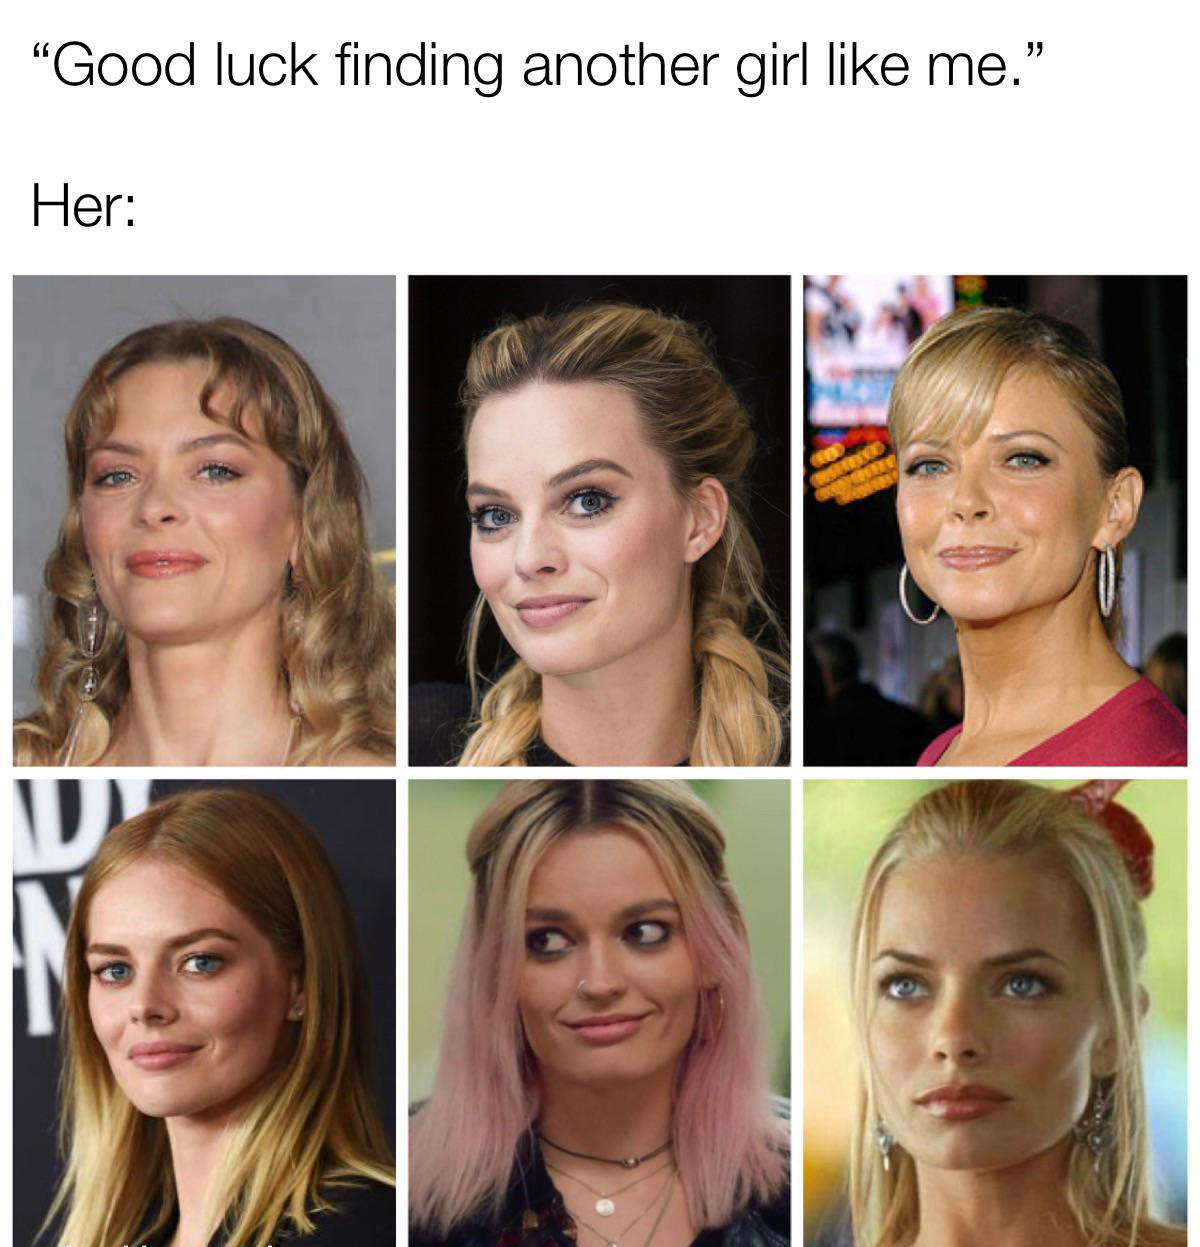 fresh memes - margot robbie multiverse - "Good luck finding another girl me." Her 17